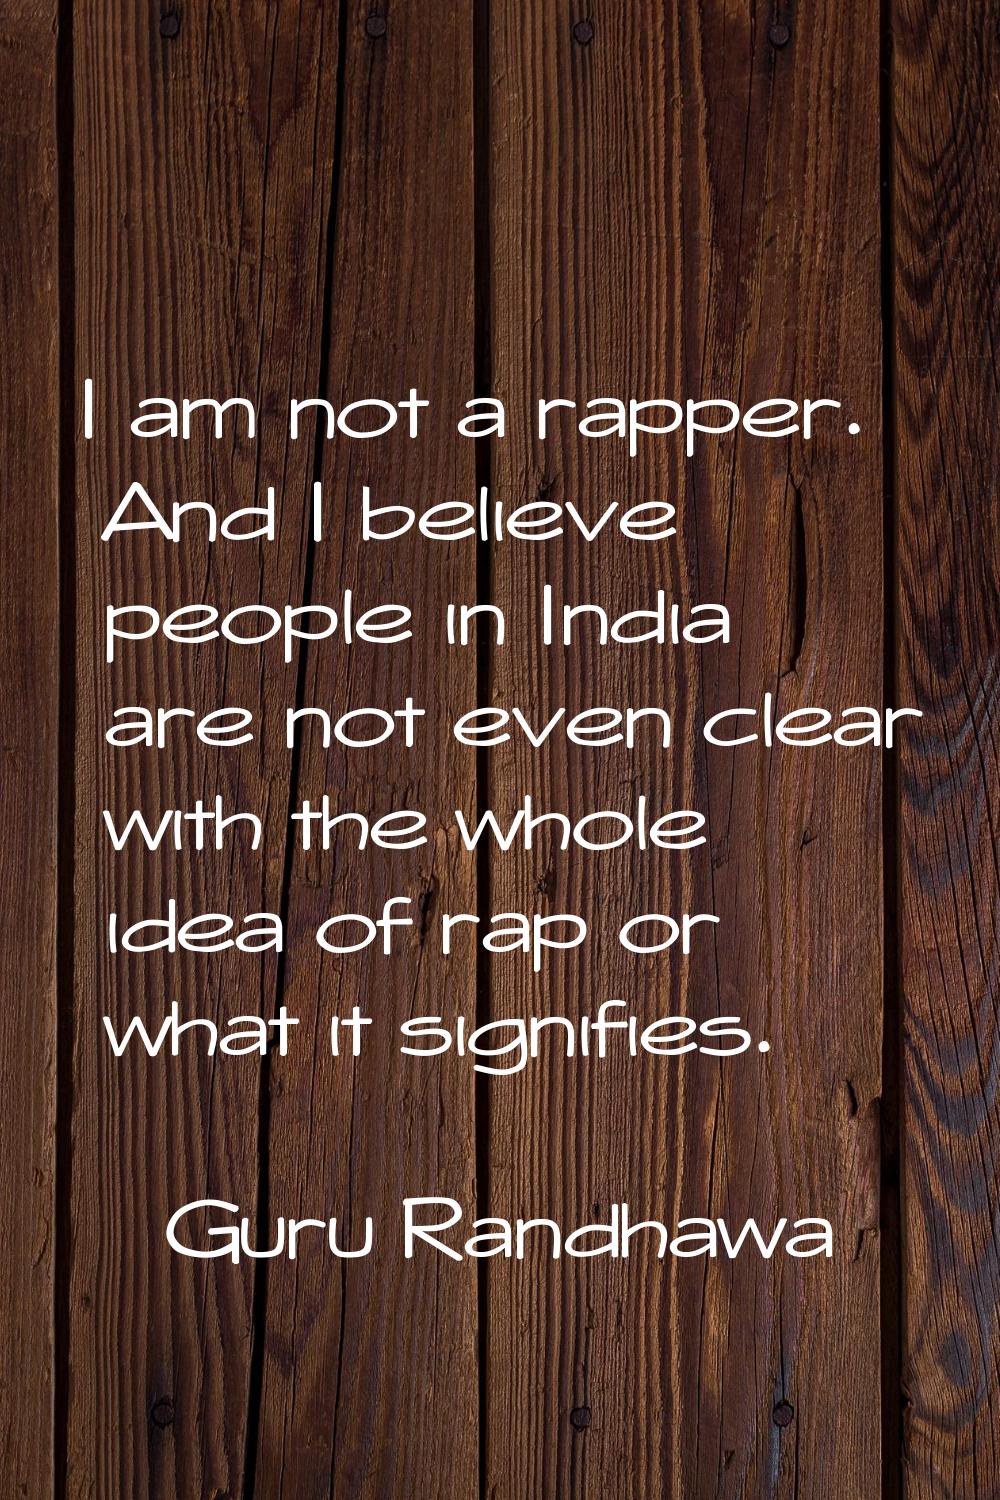 I am not a rapper. And I believe people in India are not even clear with the whole idea of rap or w